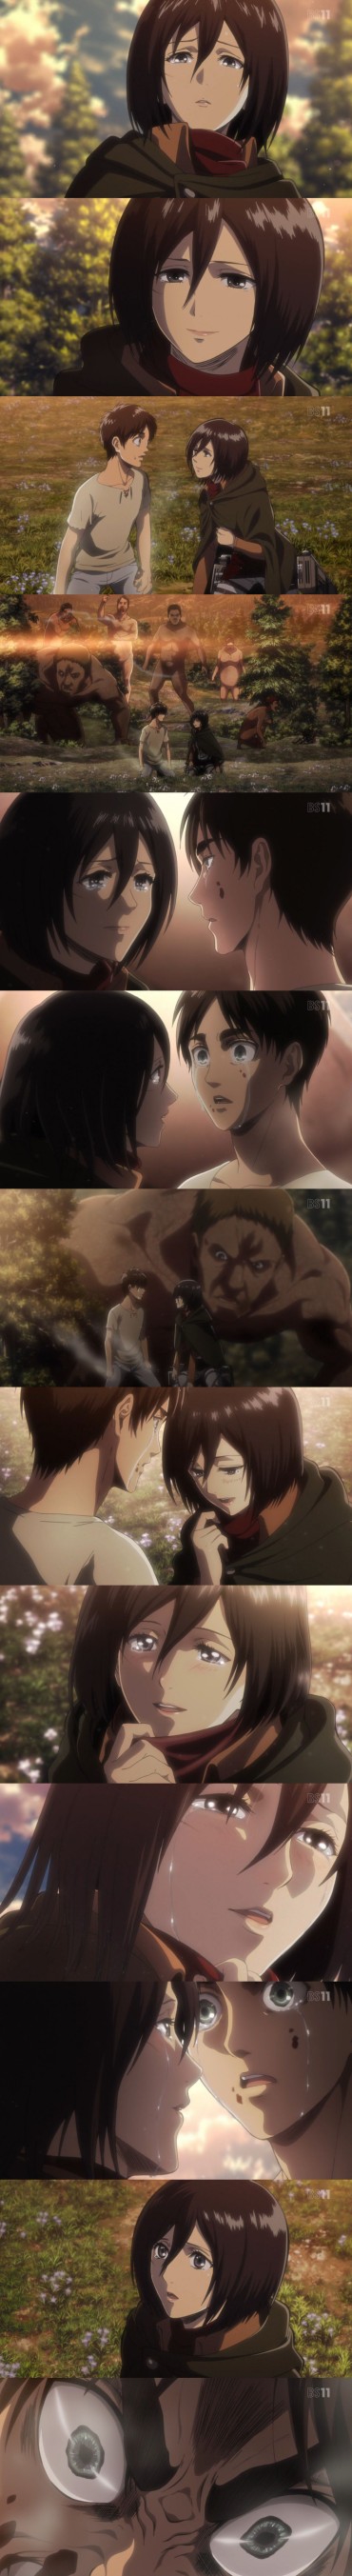 Bigboobs [good News] Matter Wwwwwwww Which Is Too High In Mikasa Of The Giant Of The Attack, A Heroine Power Huge Cock